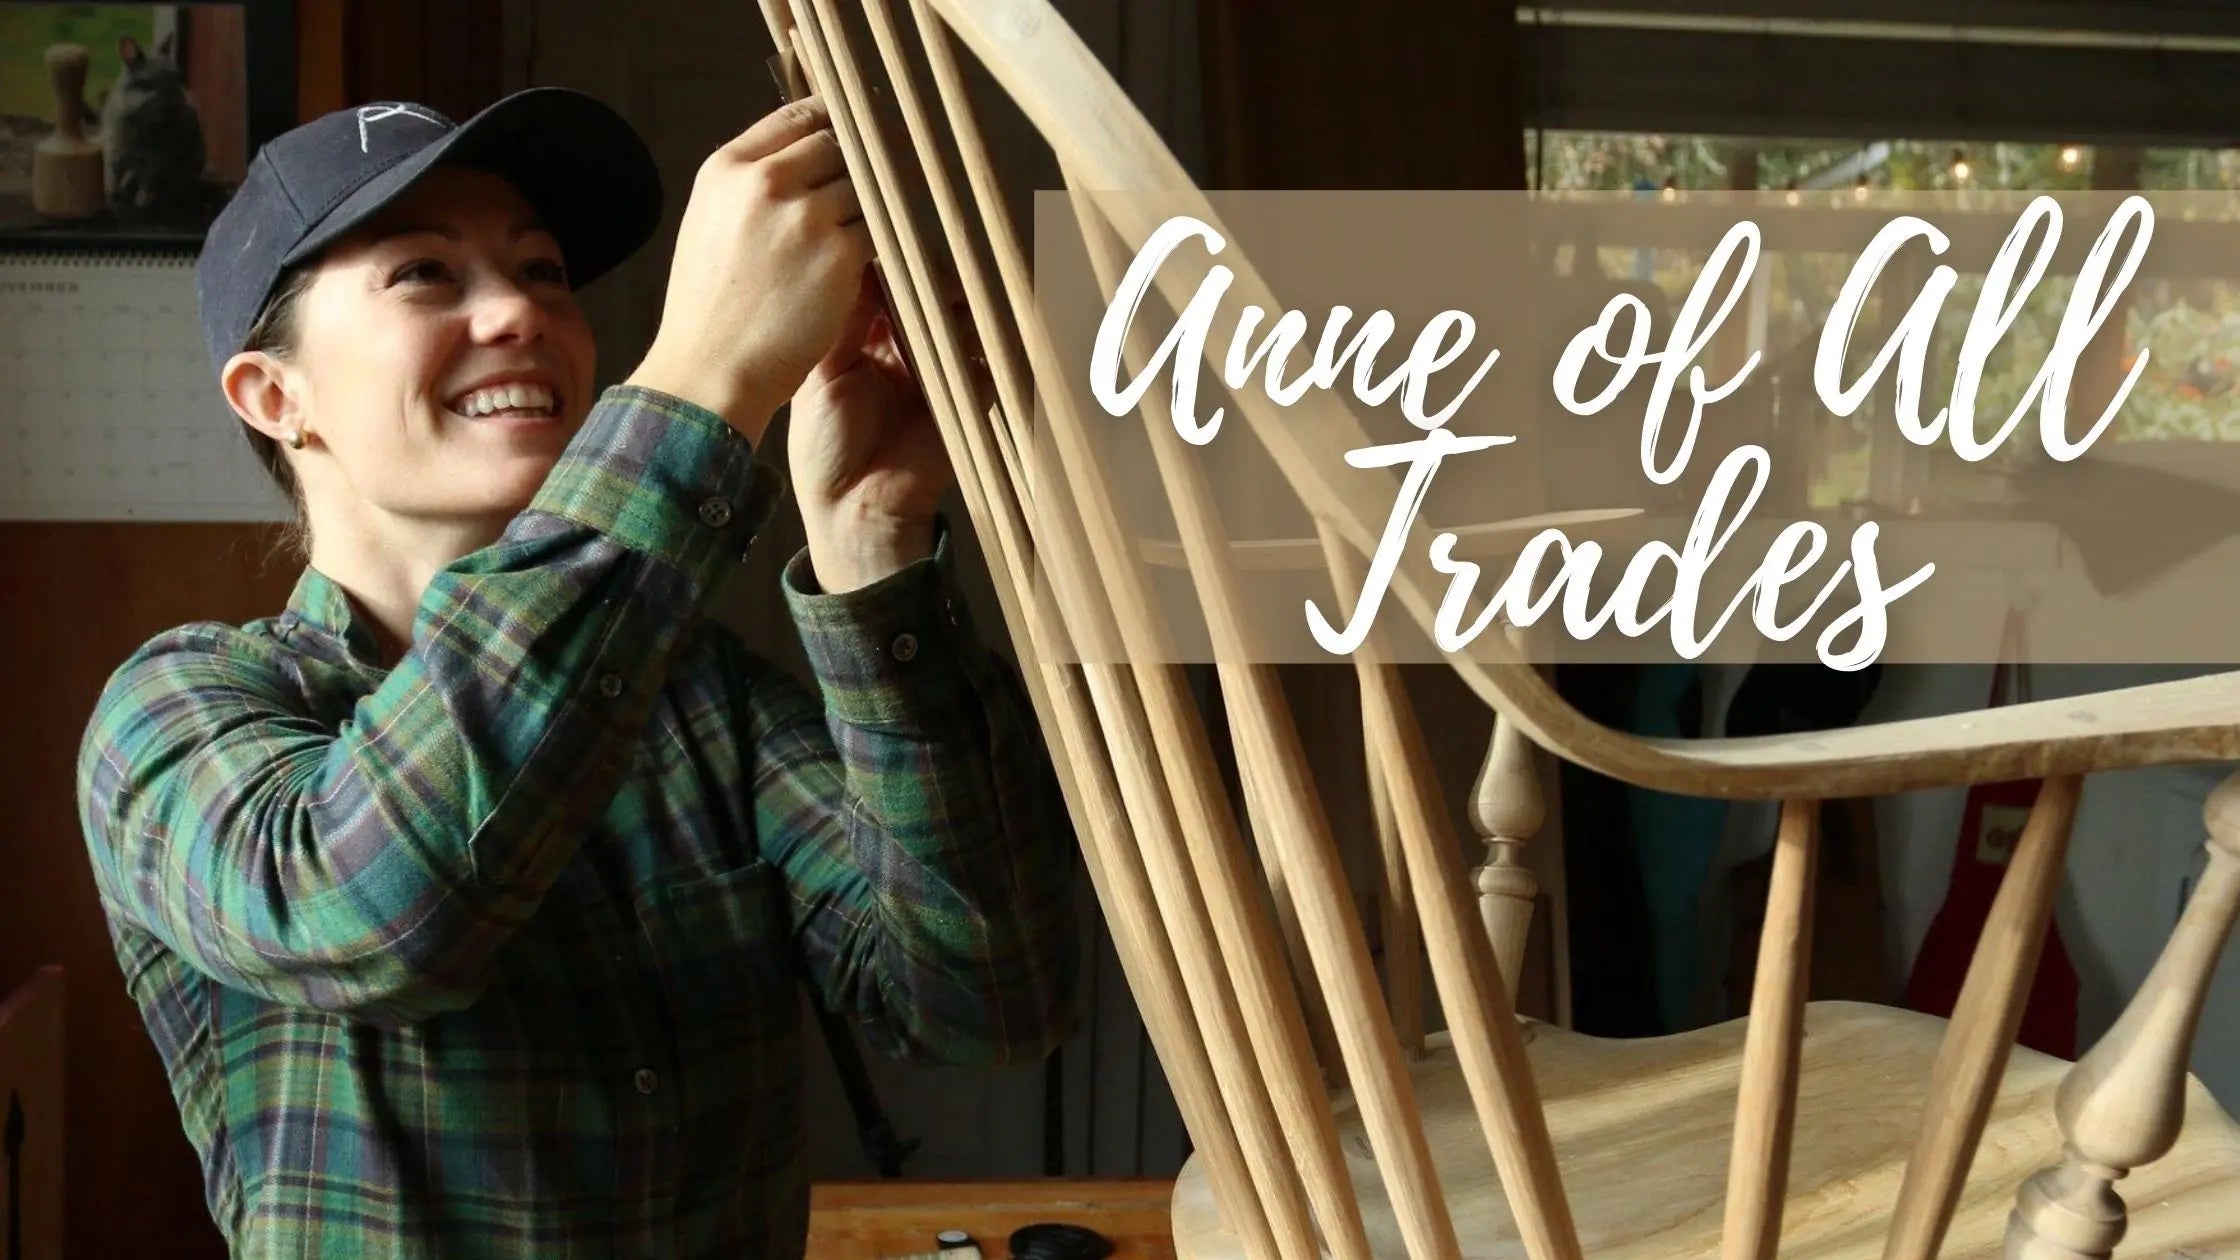 Meet The Wood Worker: Anne of all trades